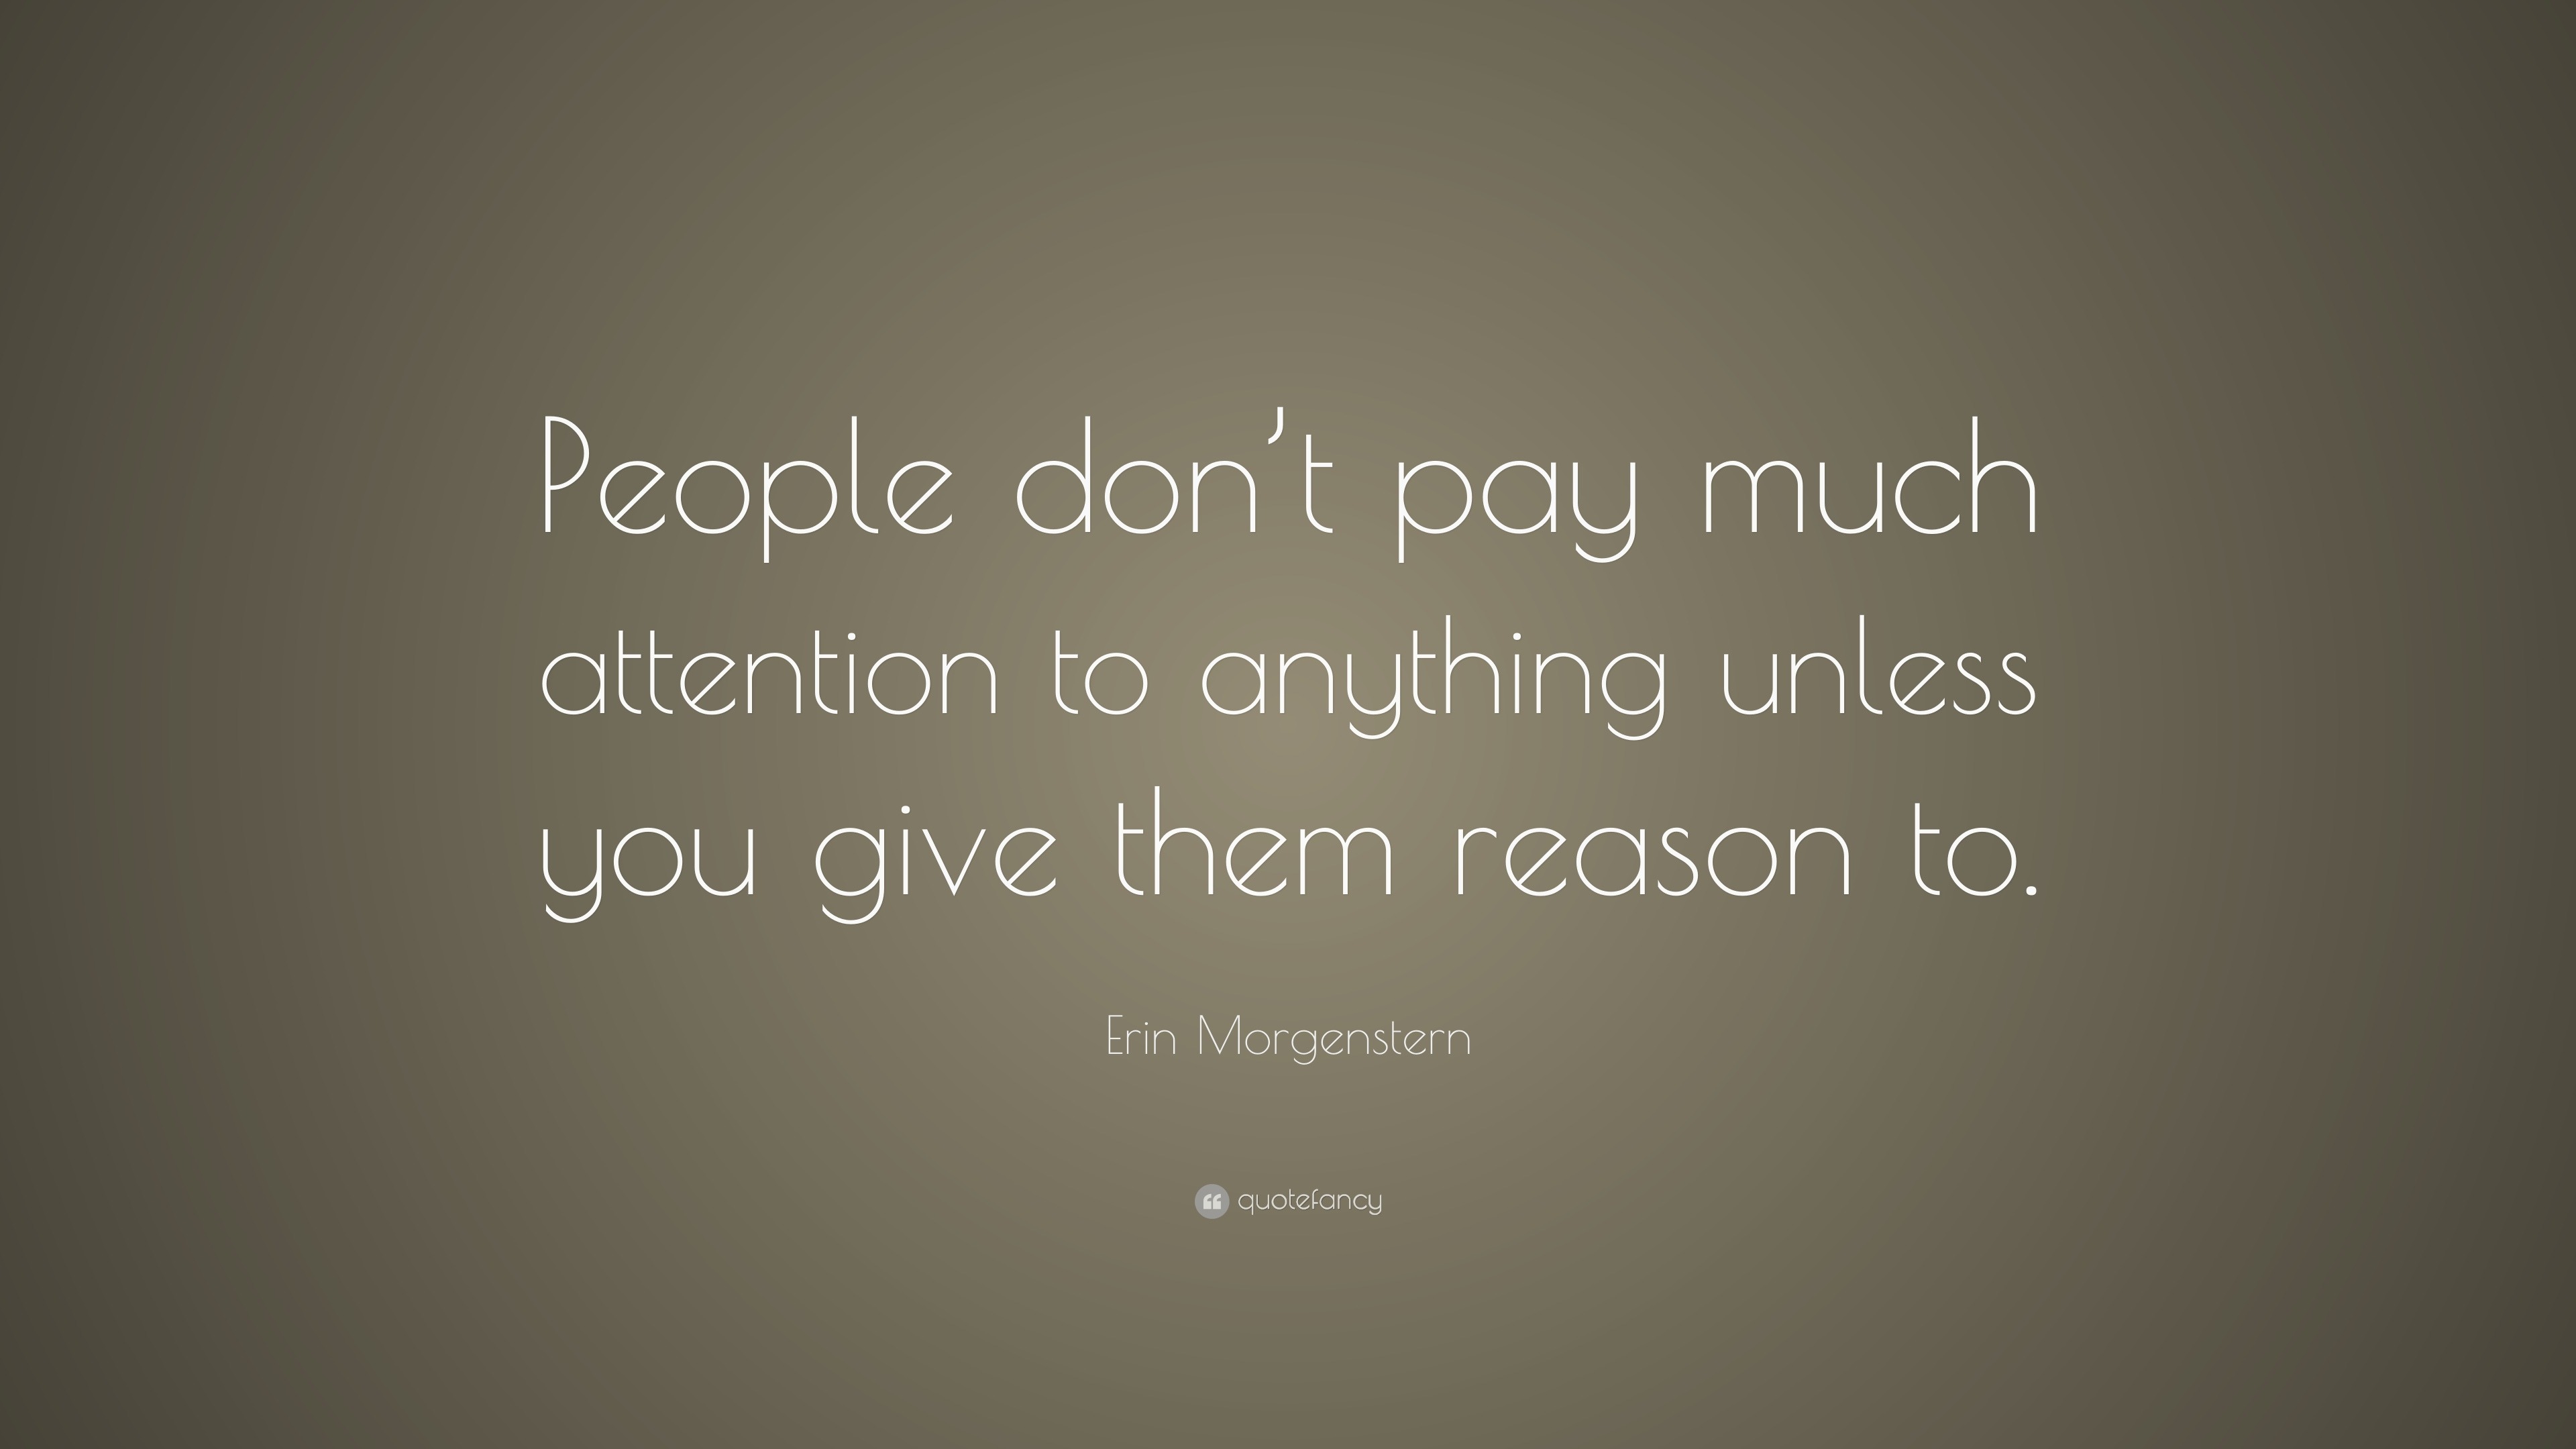 Erin Morgenstern Quote: “People don’t pay much attention to anything ...